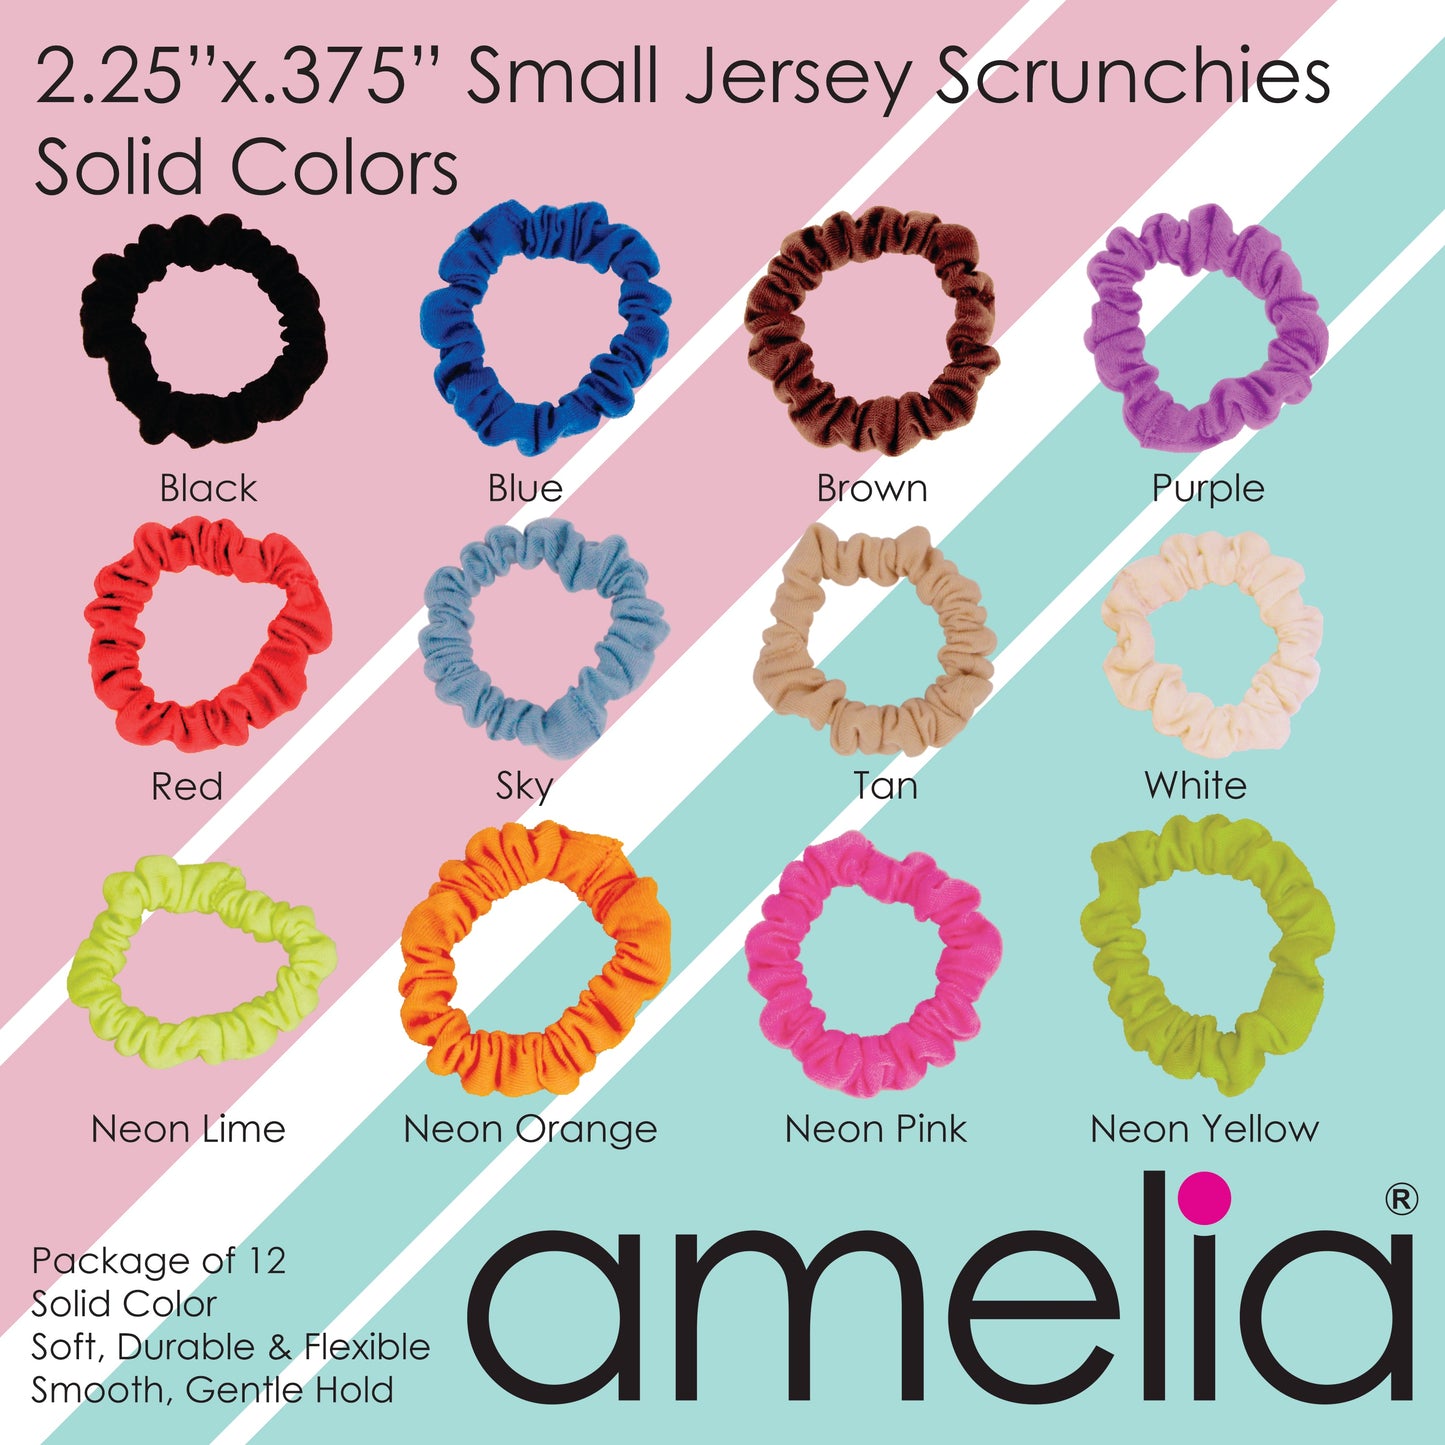 Amelia Beauty, Blue Jersey Scrunchies, 2.25in Diameter, Gentle on Hair, Strong Hold, No Snag, No Dents or Creases. 12 Pack